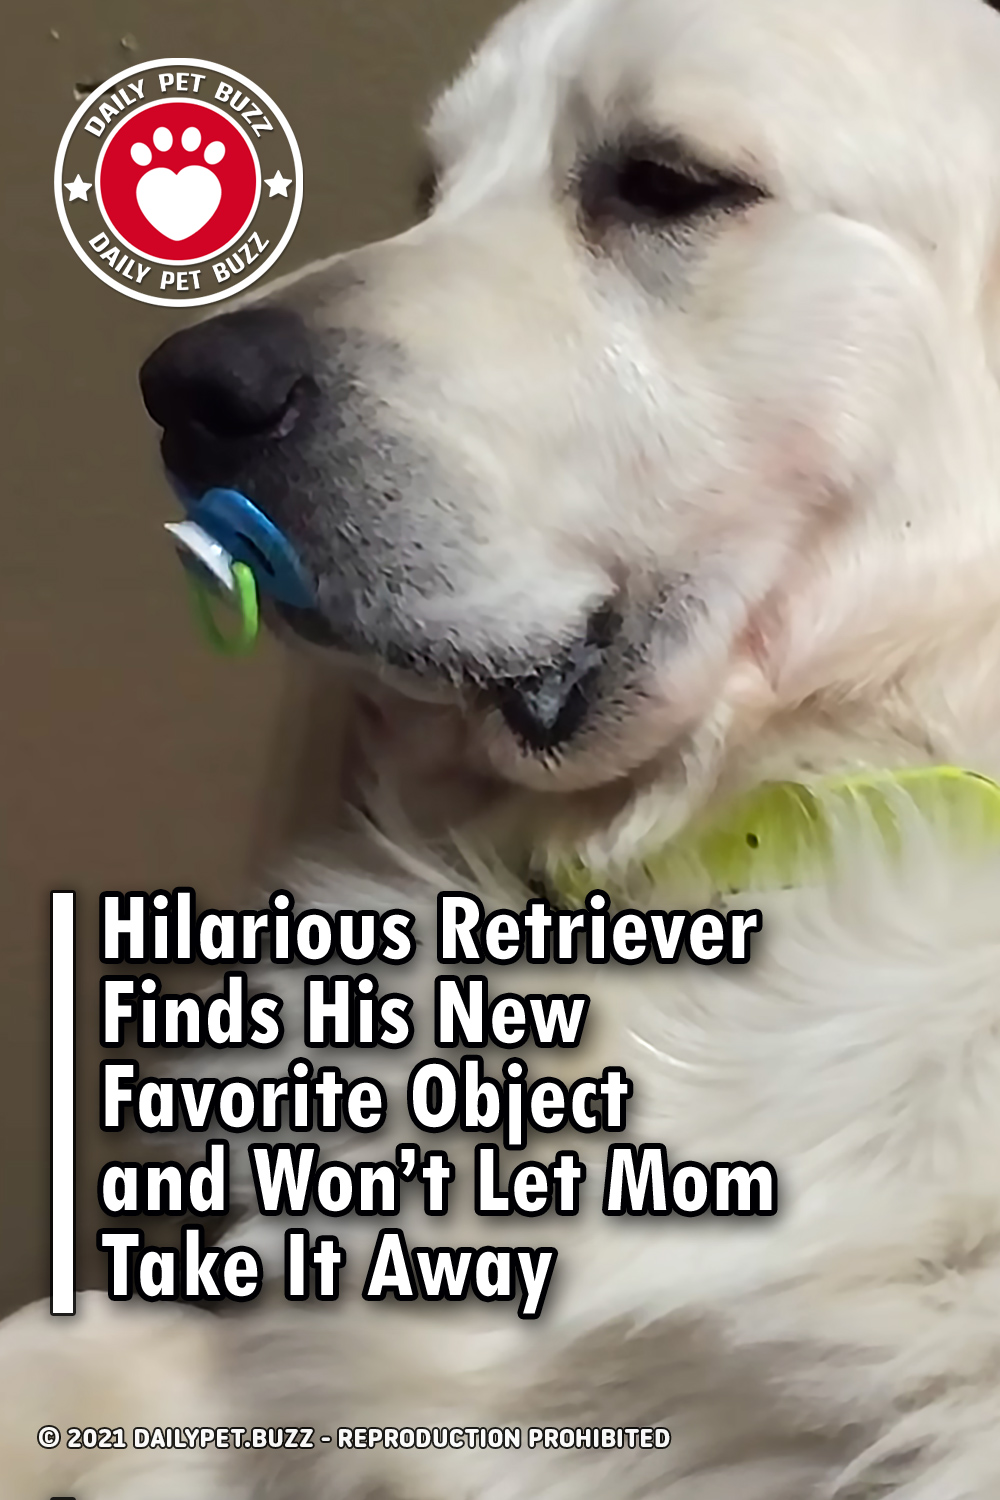 Hilarious Retriever Finds His New Favorite Object and Won’t Let Mom Take It Away